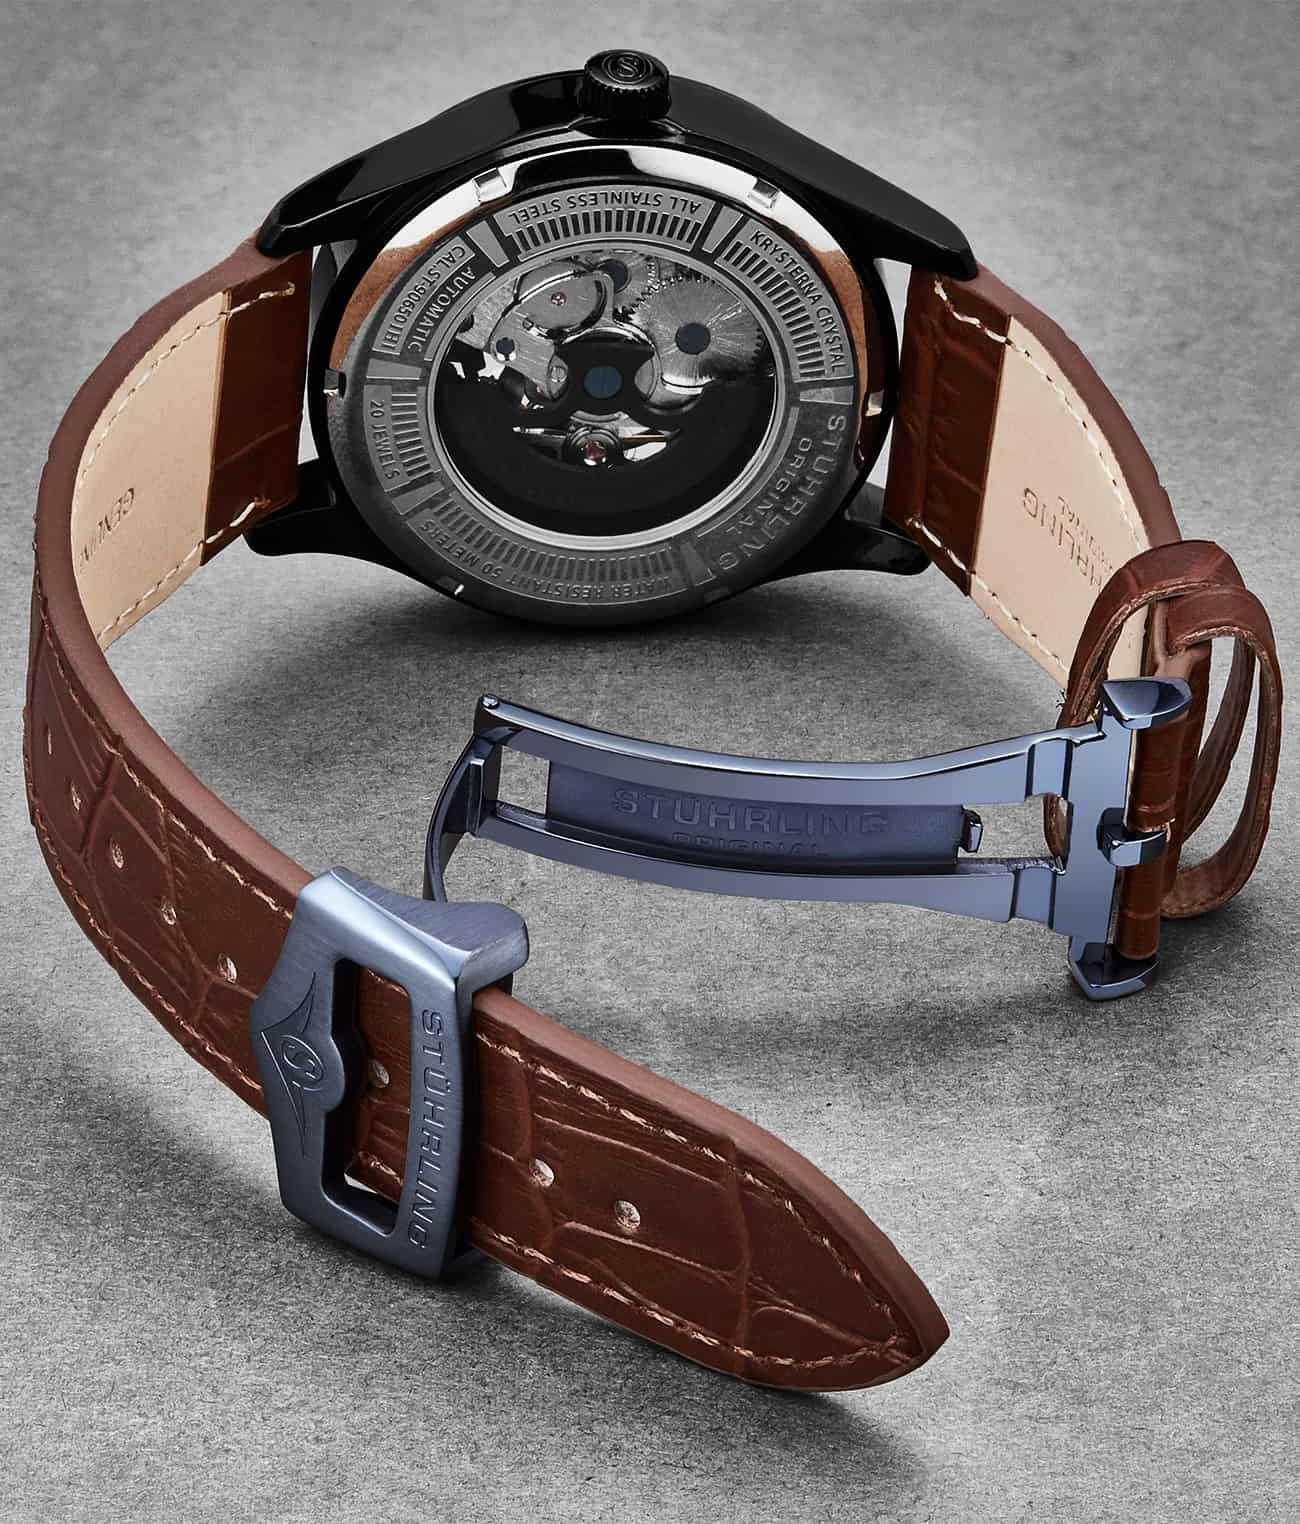 24mm Leather Strap with Stainless Steel Deployant Buckle